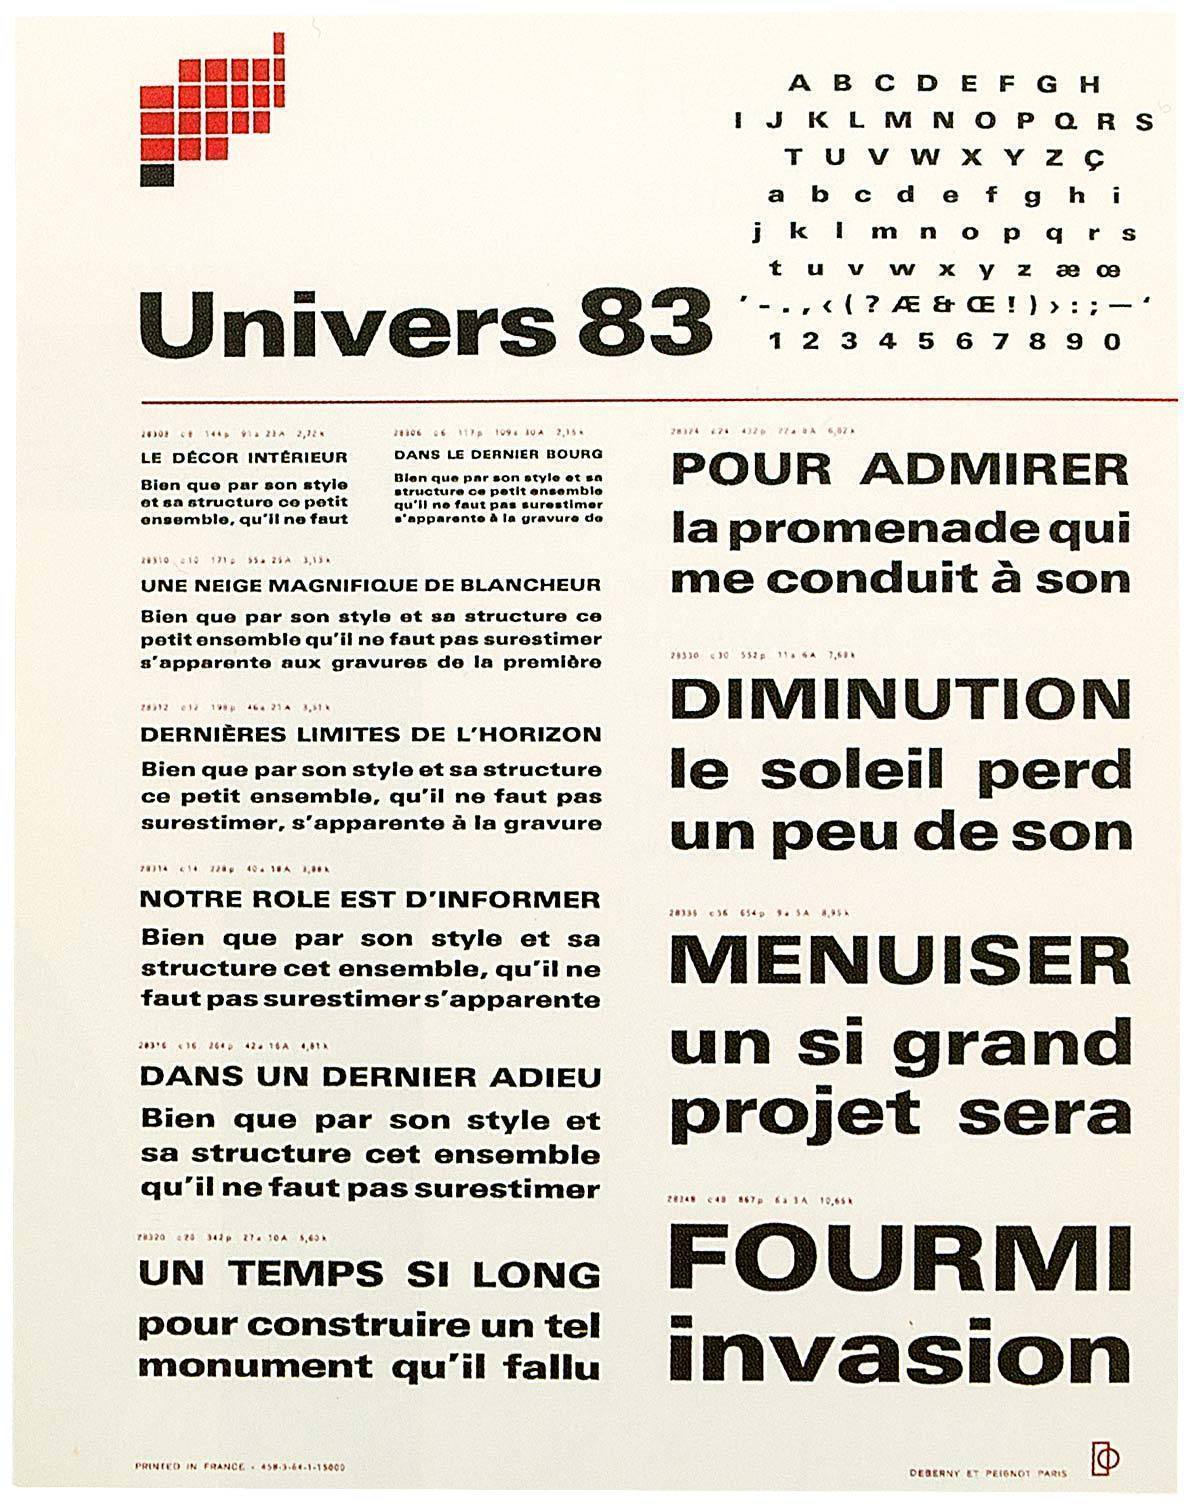 This Univers specimen designed by Rémy Peignot for [Deberny & Peignot](/designers/deberny-peignot) in 1964 is one of the most notable type catalogues ever published. It opens with Peignot’s Univers diagram, that is used in a miniature version for navigation on the collection of loose sheets to indicate each weight’s position within the system. (Reproduced from *The Book of Books*, Cologne 2012, with kind permission of Mathieu Lommen)